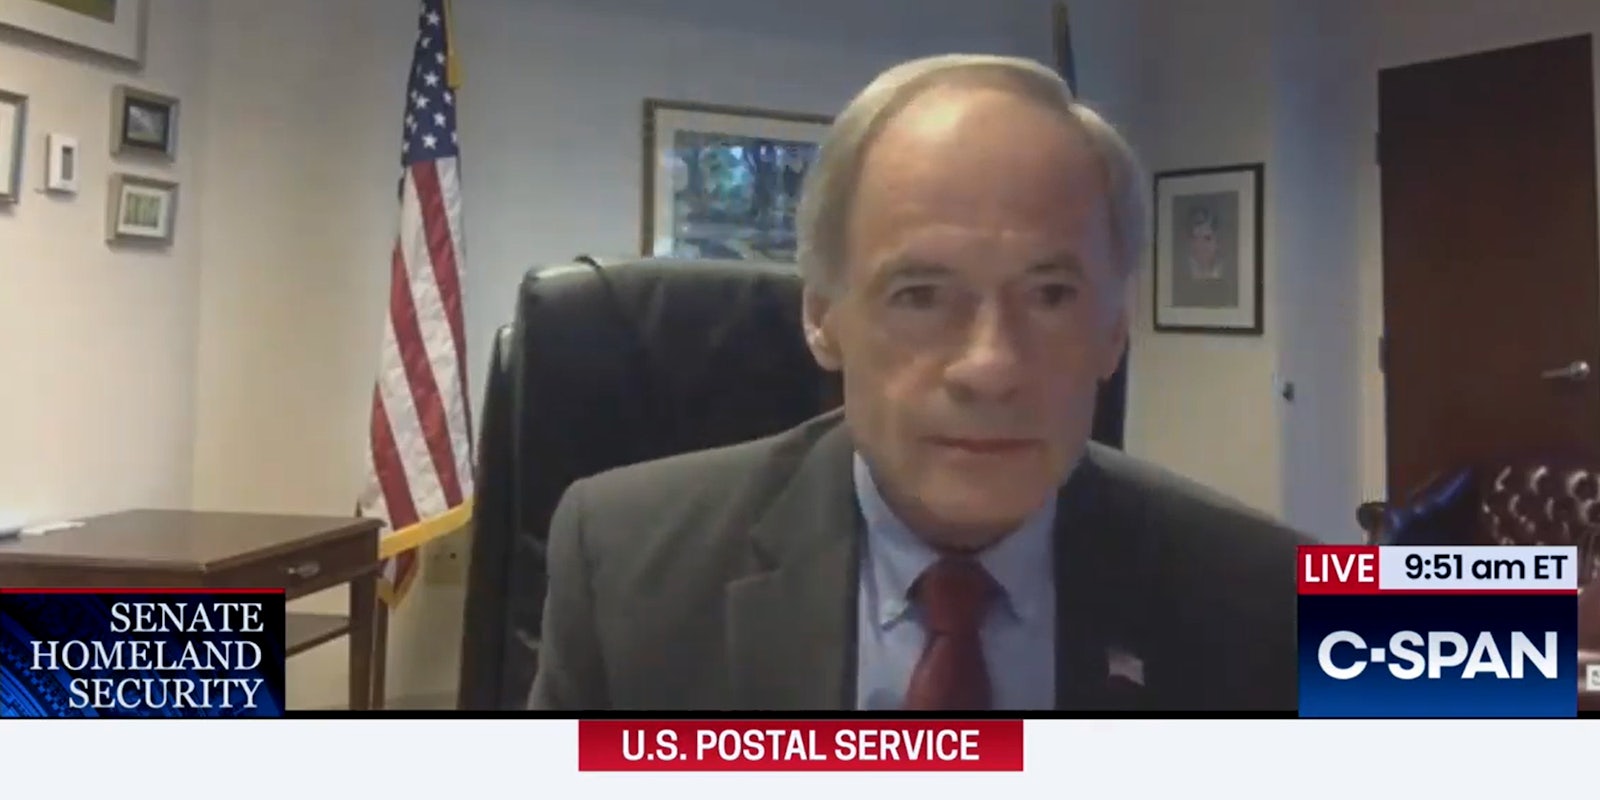 tom carper after saying 'fuck fuck fuck' during live C-SPAN coverage